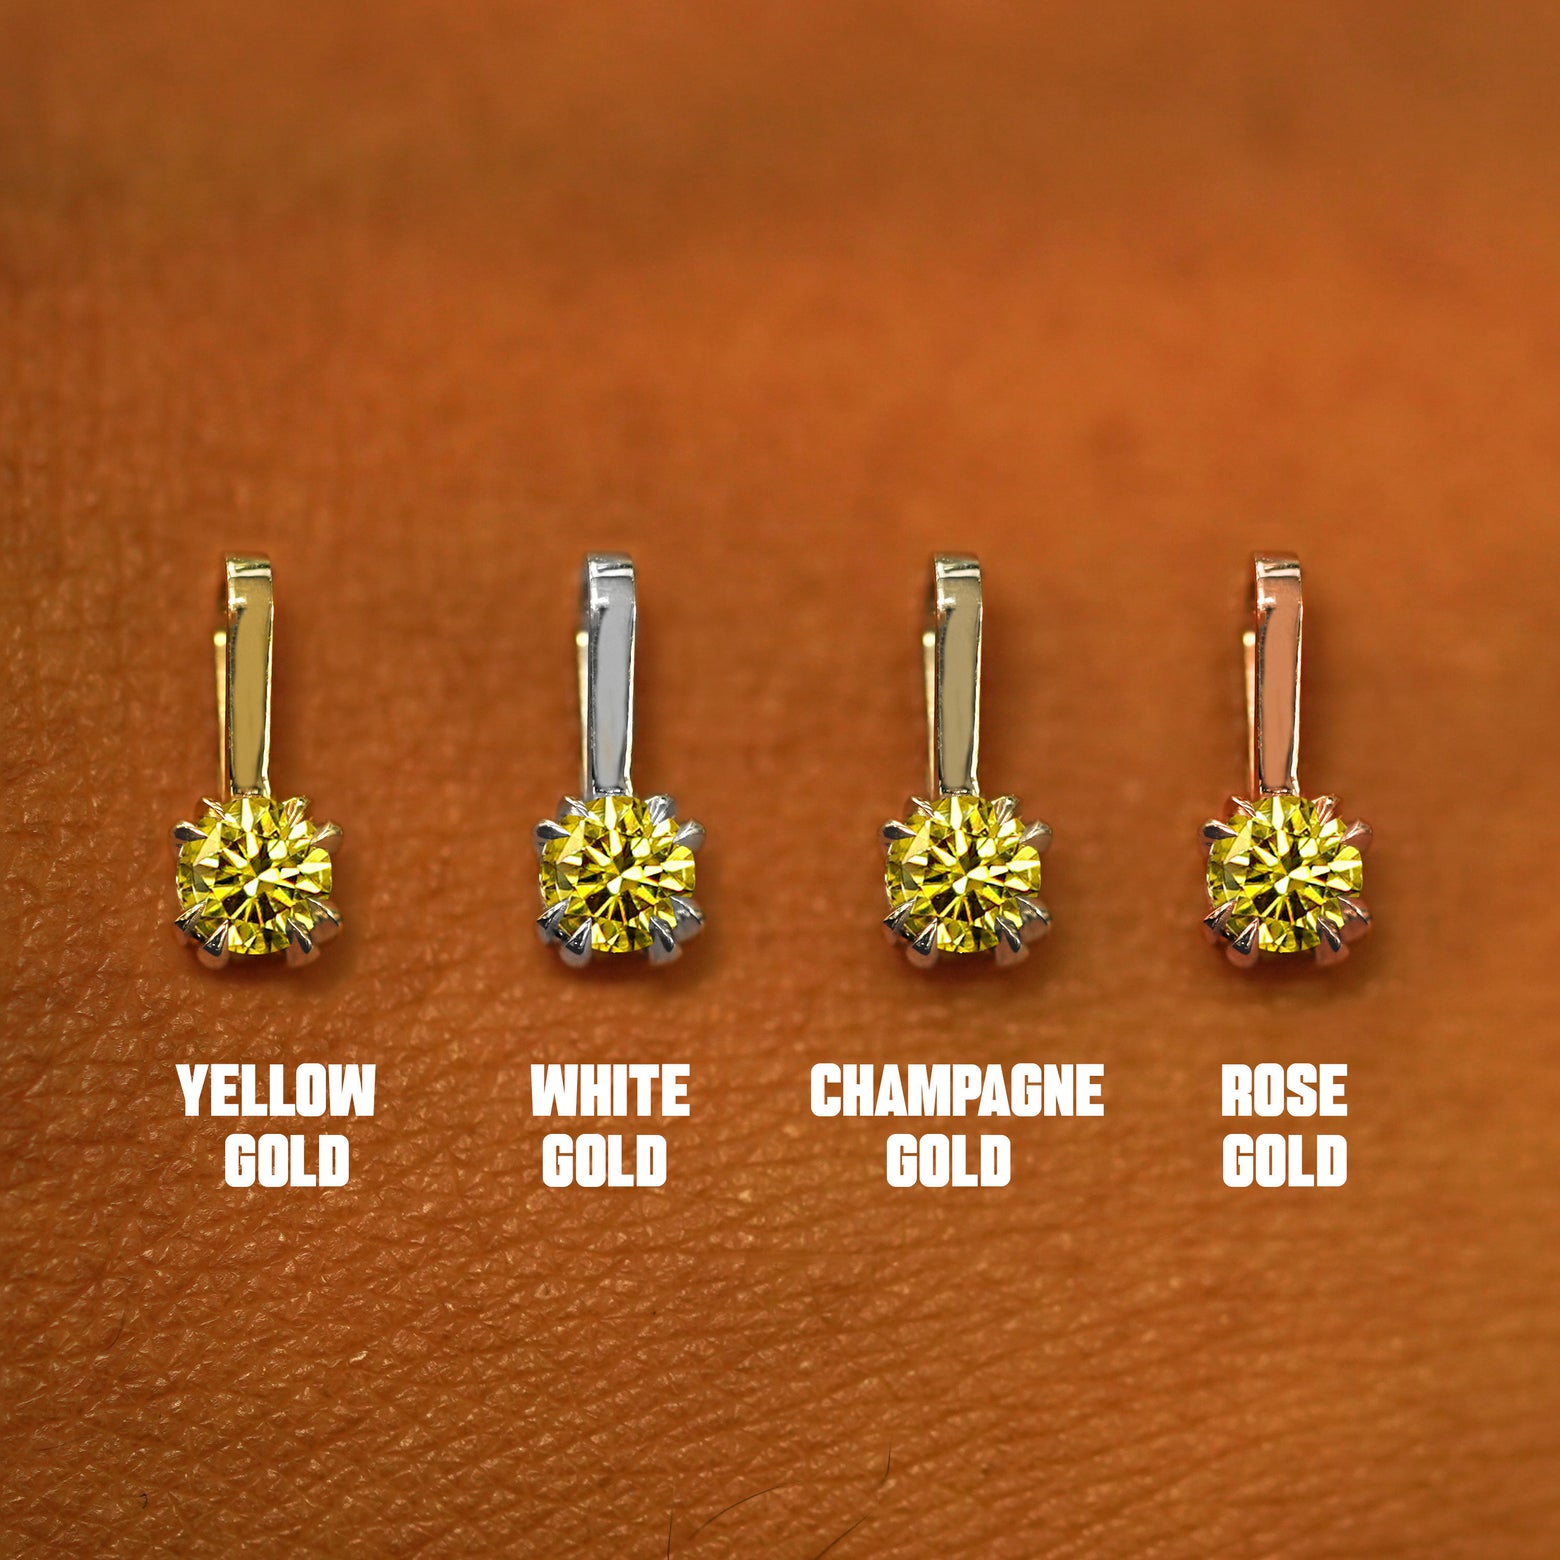 Four versions of the Yellow Diamond Charm shown in options of yellow, white, rose, and champagne gold